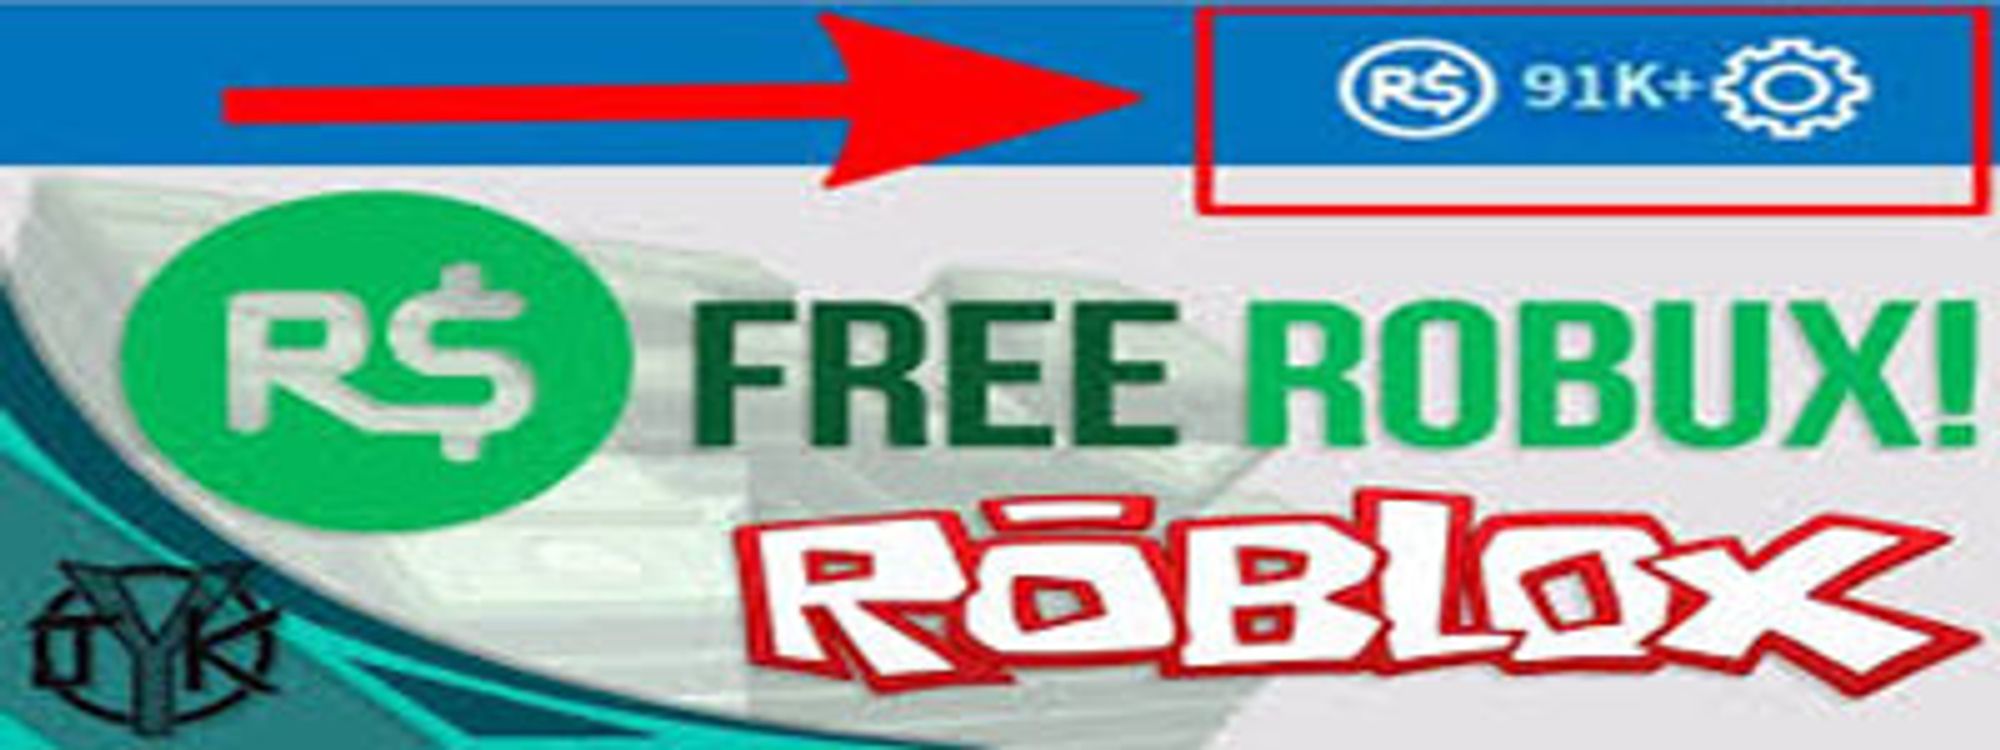 Roblox Robux Free Roblox Robux Codes With Skins Password Account 2020 - roblox robux codes ios